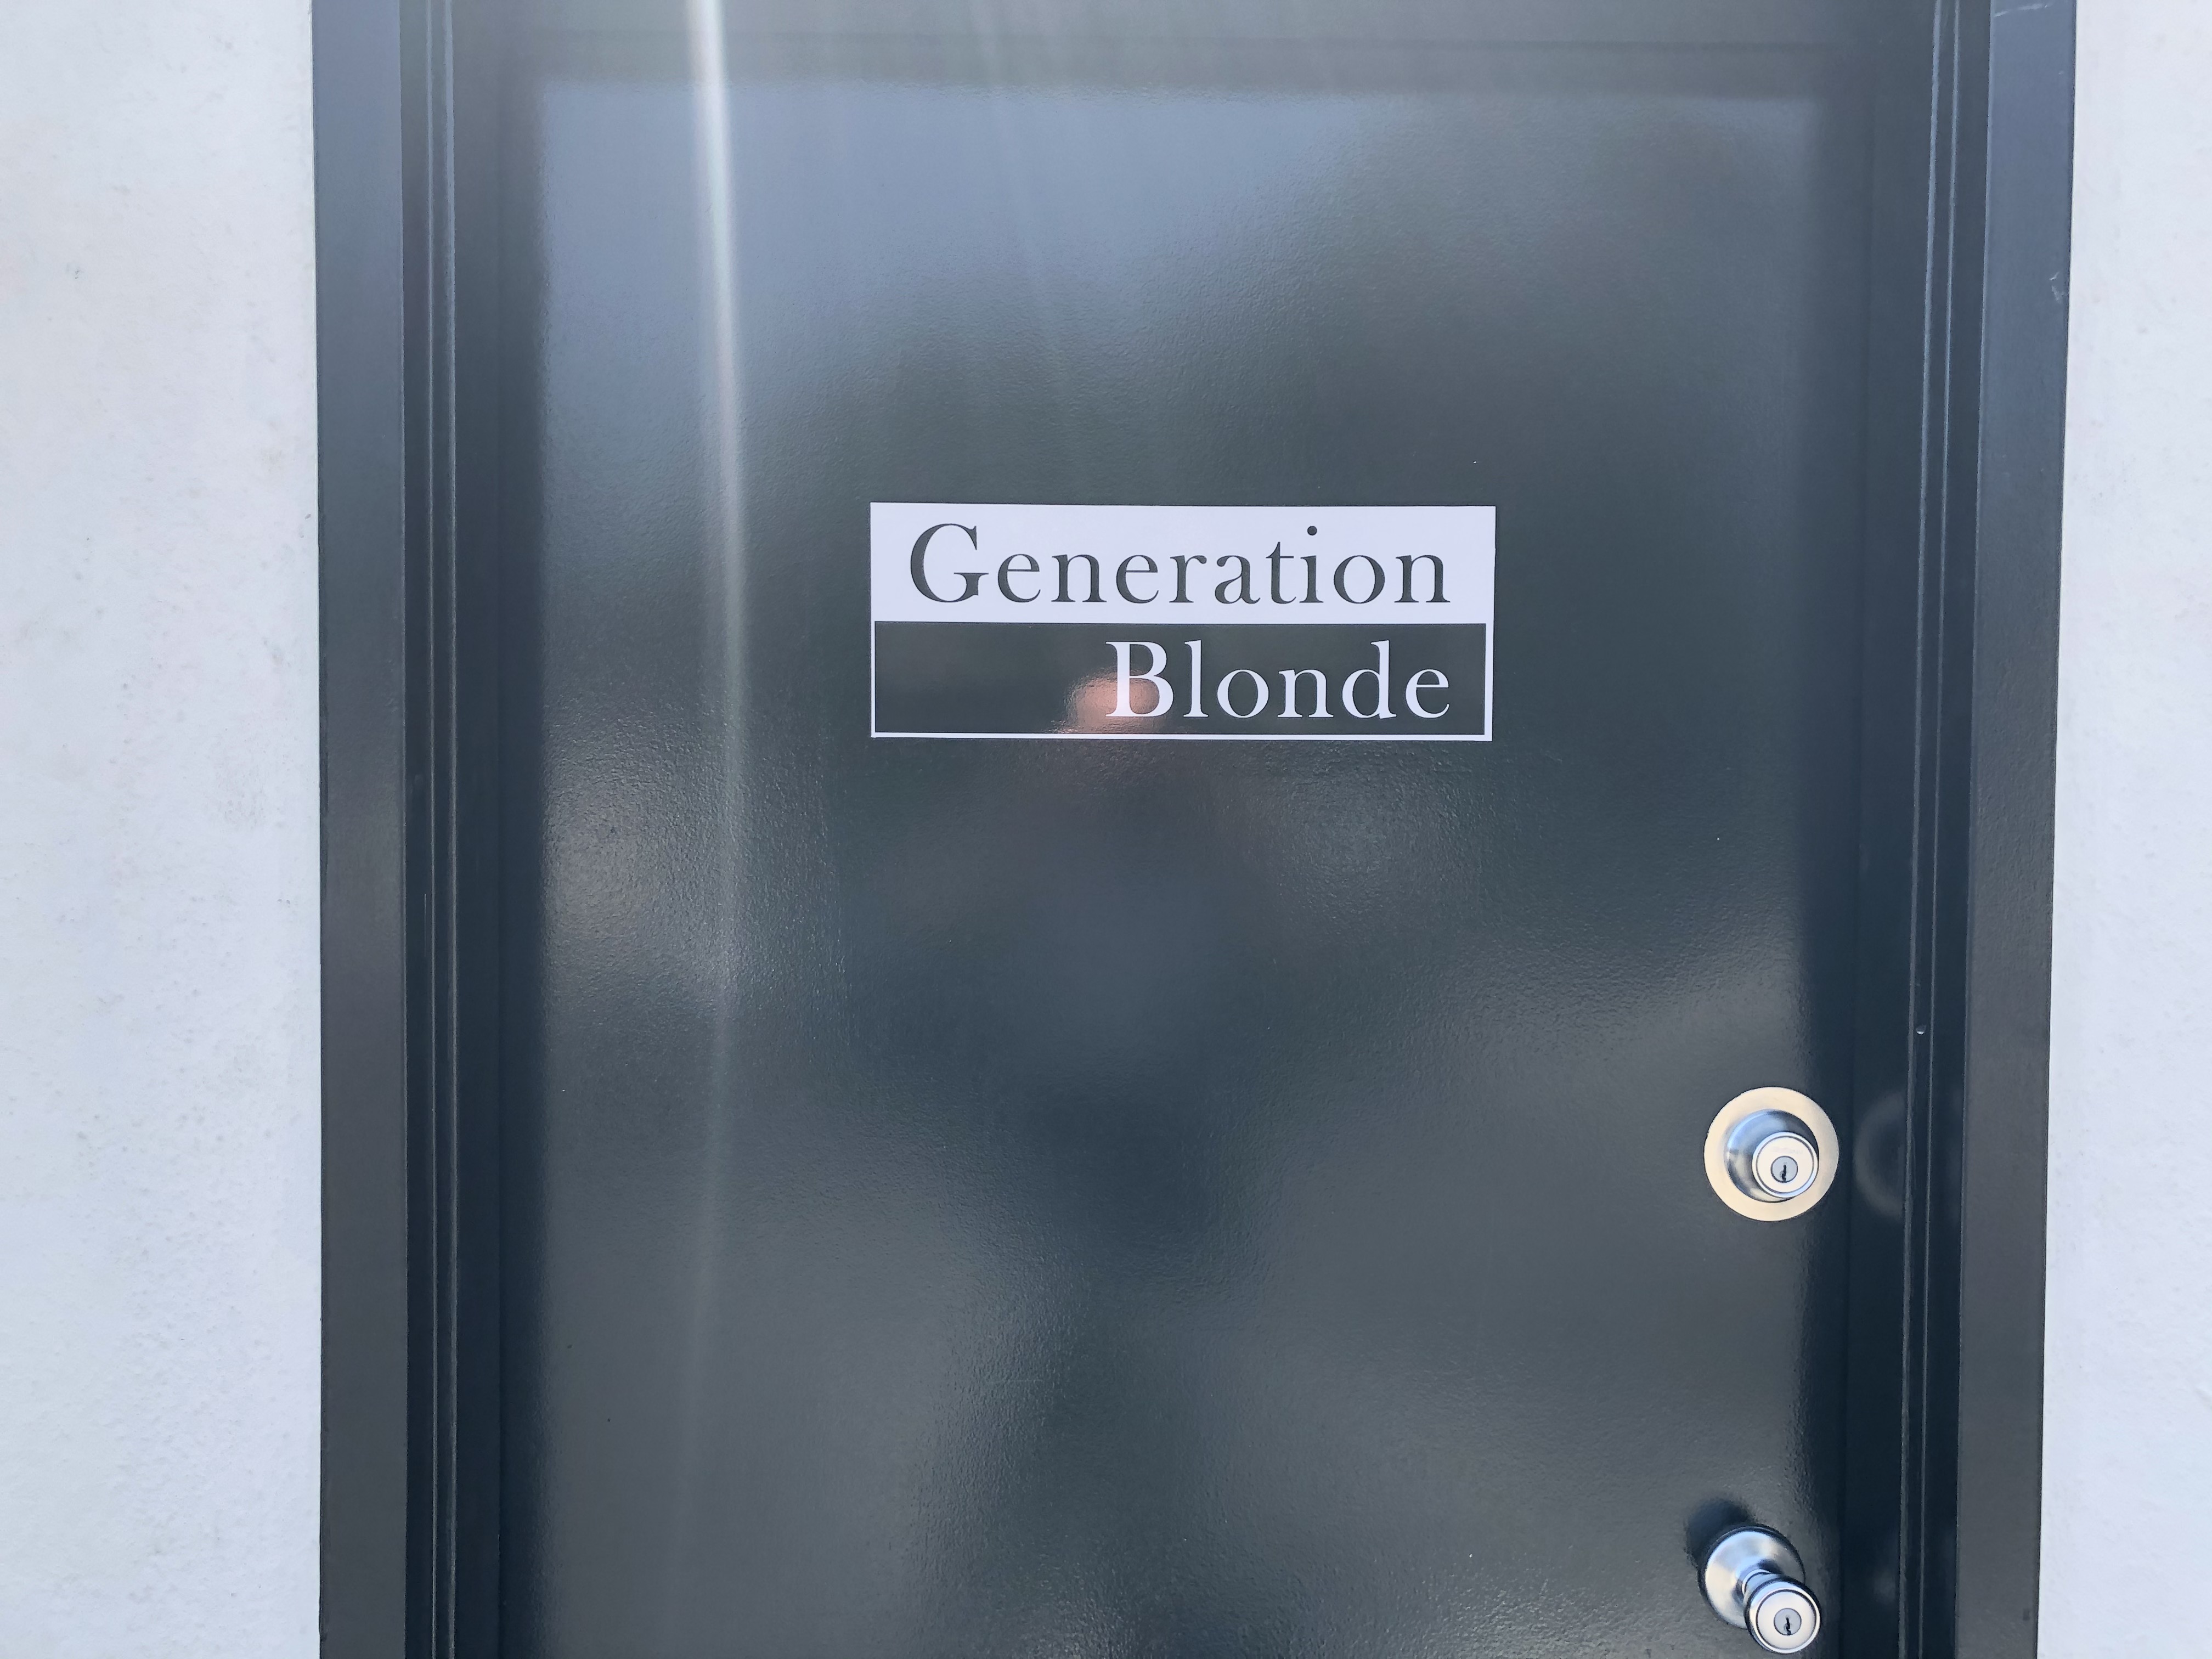 Custom metal entrance sign for Generation Blonde's back door to let people in the alley know where they can enter the Woodland Hills establishment.